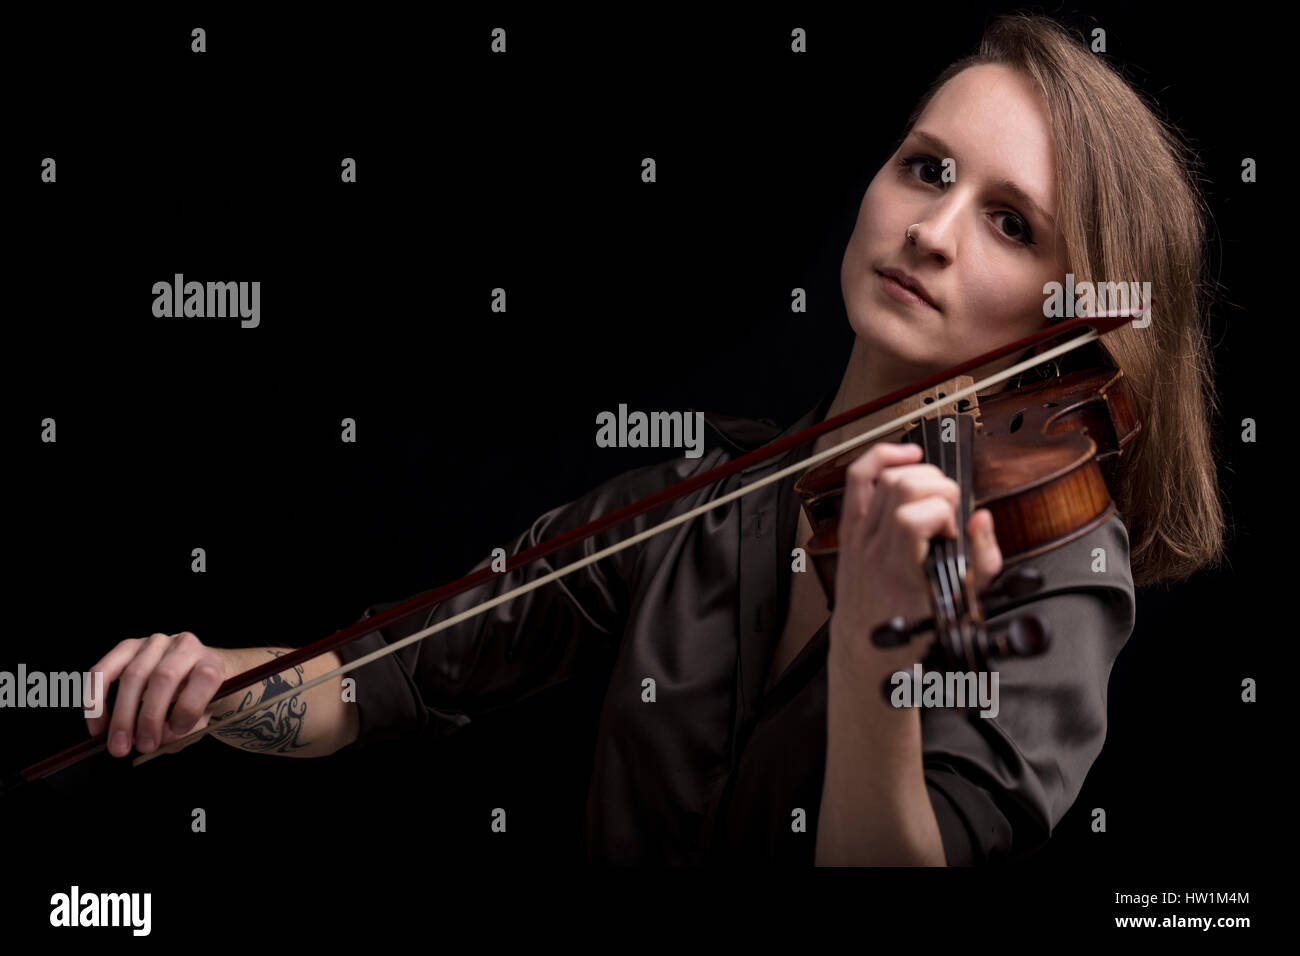 Young beautiful woman violinist player  looking at camera over instrument on her shoulder holding bow. Portrait in a blurred dark room in background.  Stock Photo